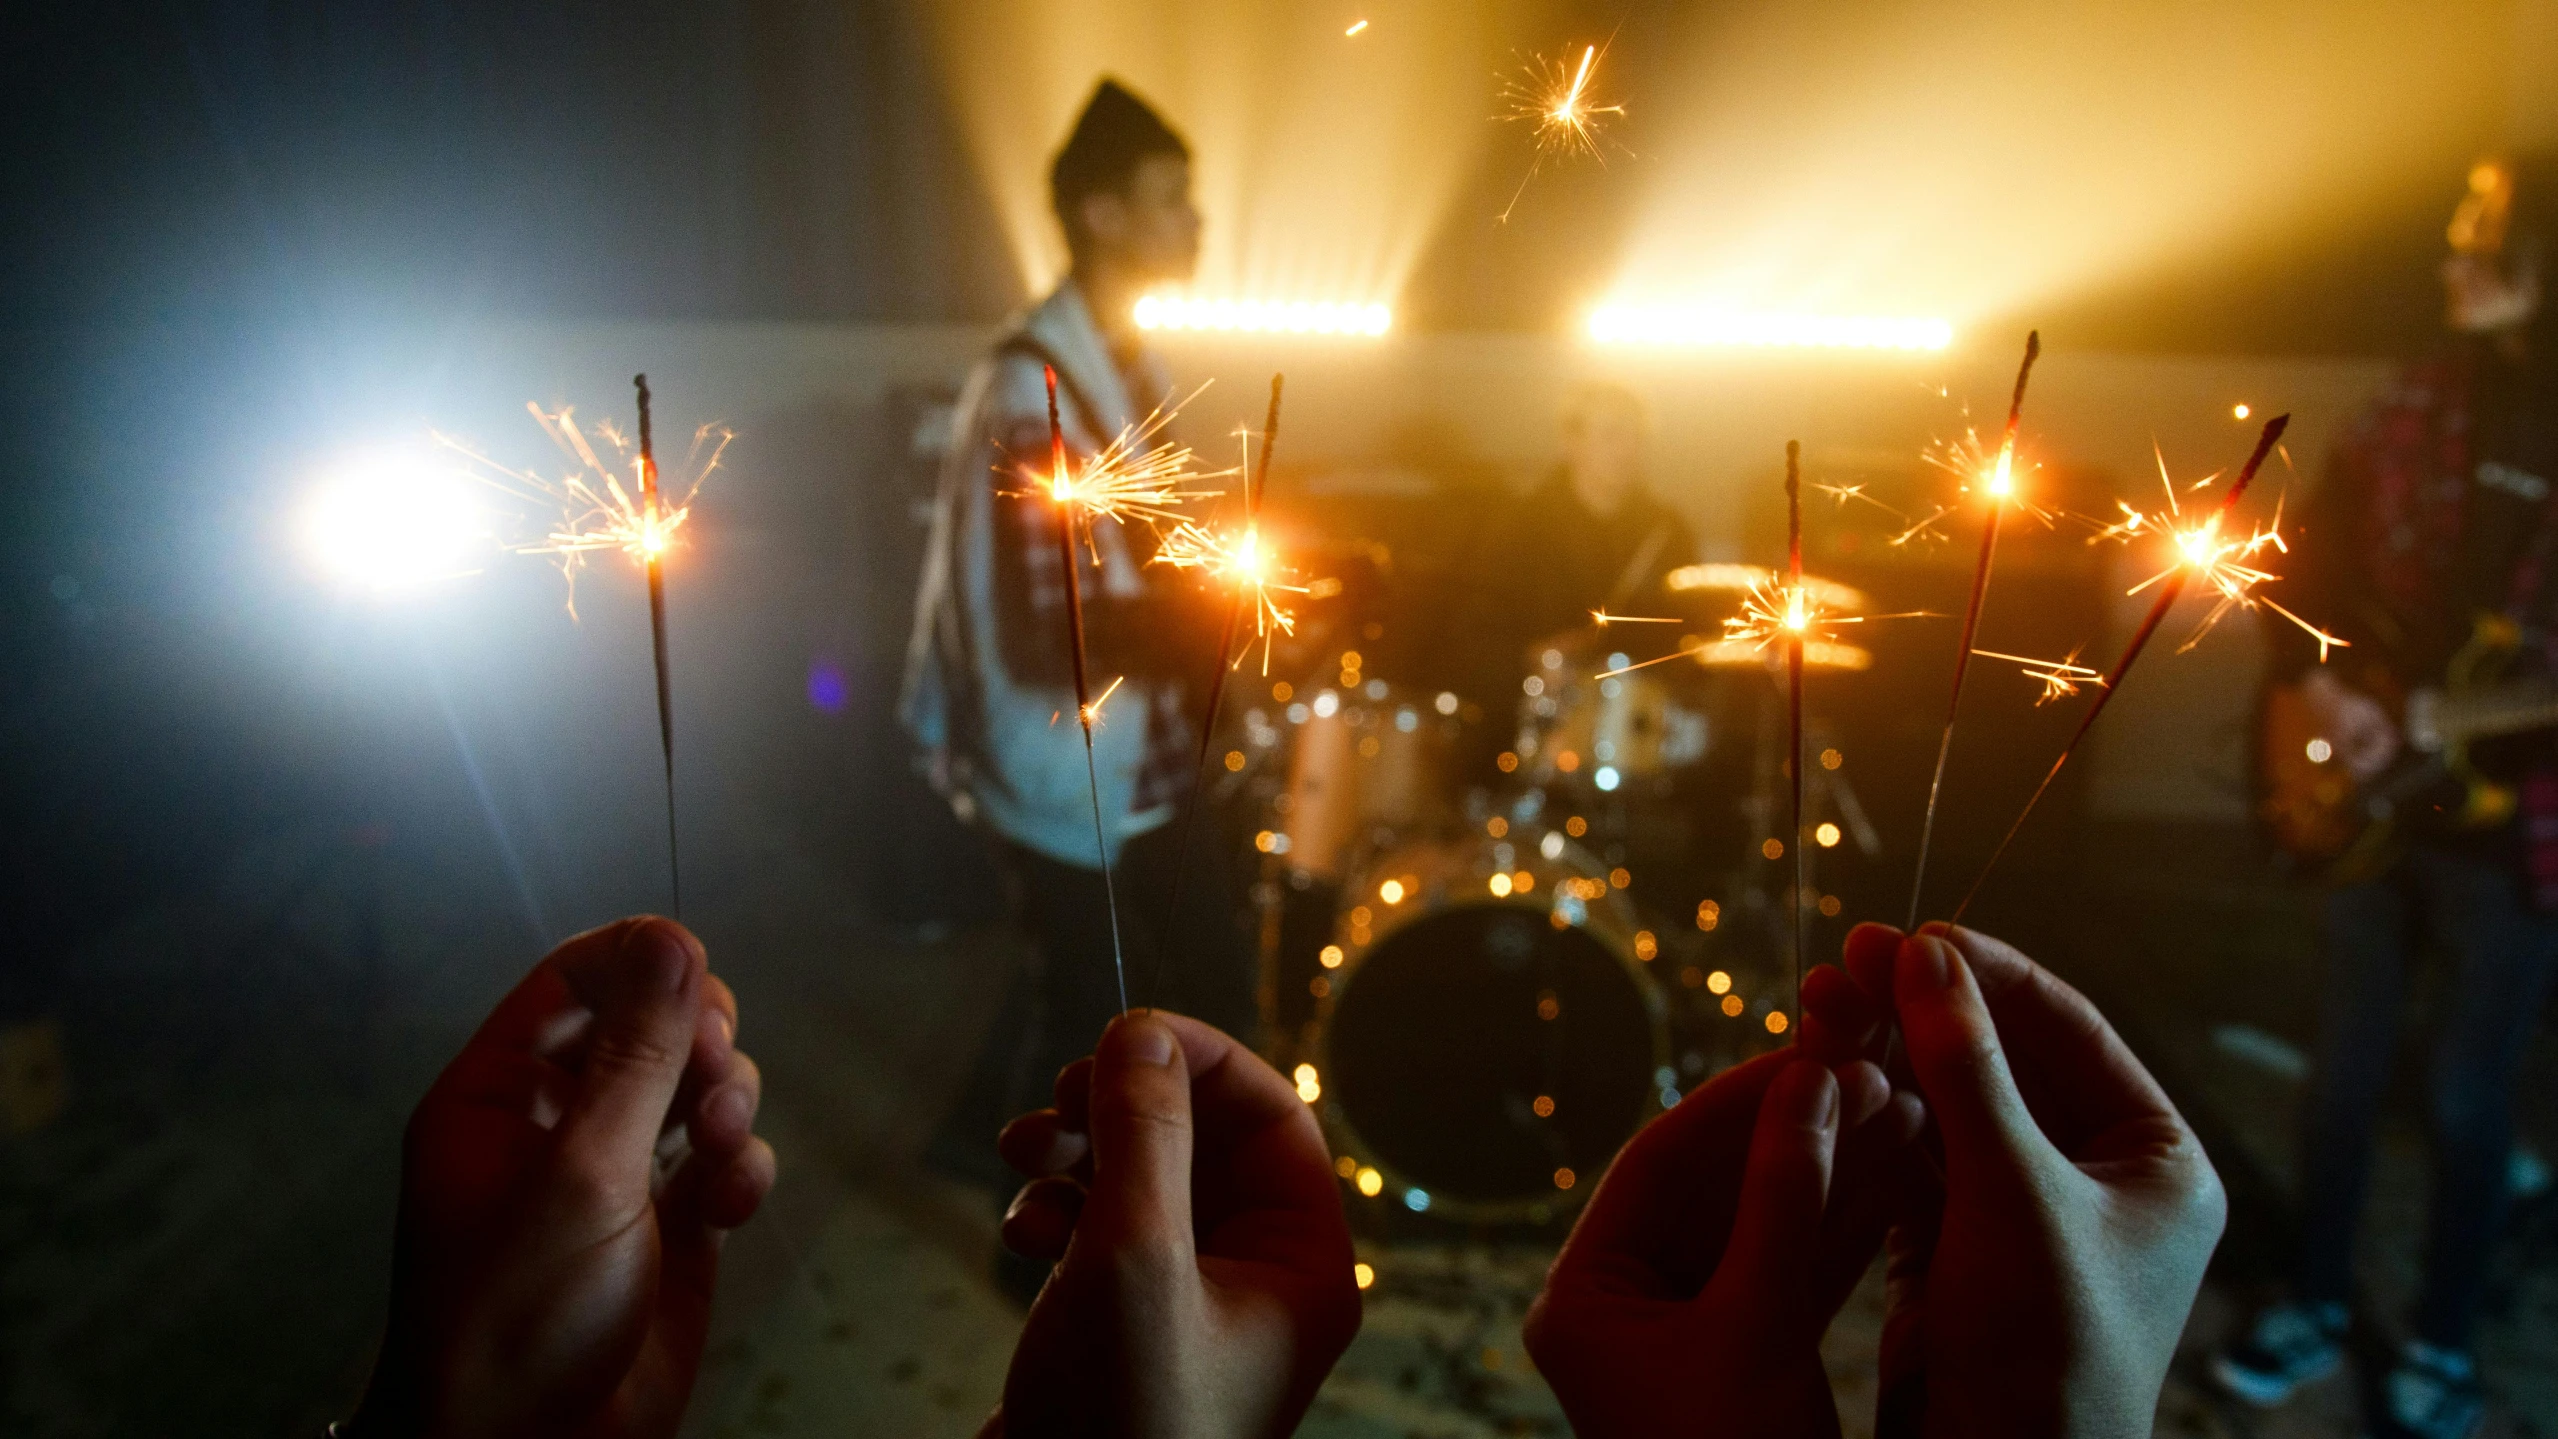 a group of people holding sparklers in their hands, an album cover, pexels contest winner, band playing instruments, brandon woelfel, medium detail, shot on sony a 7